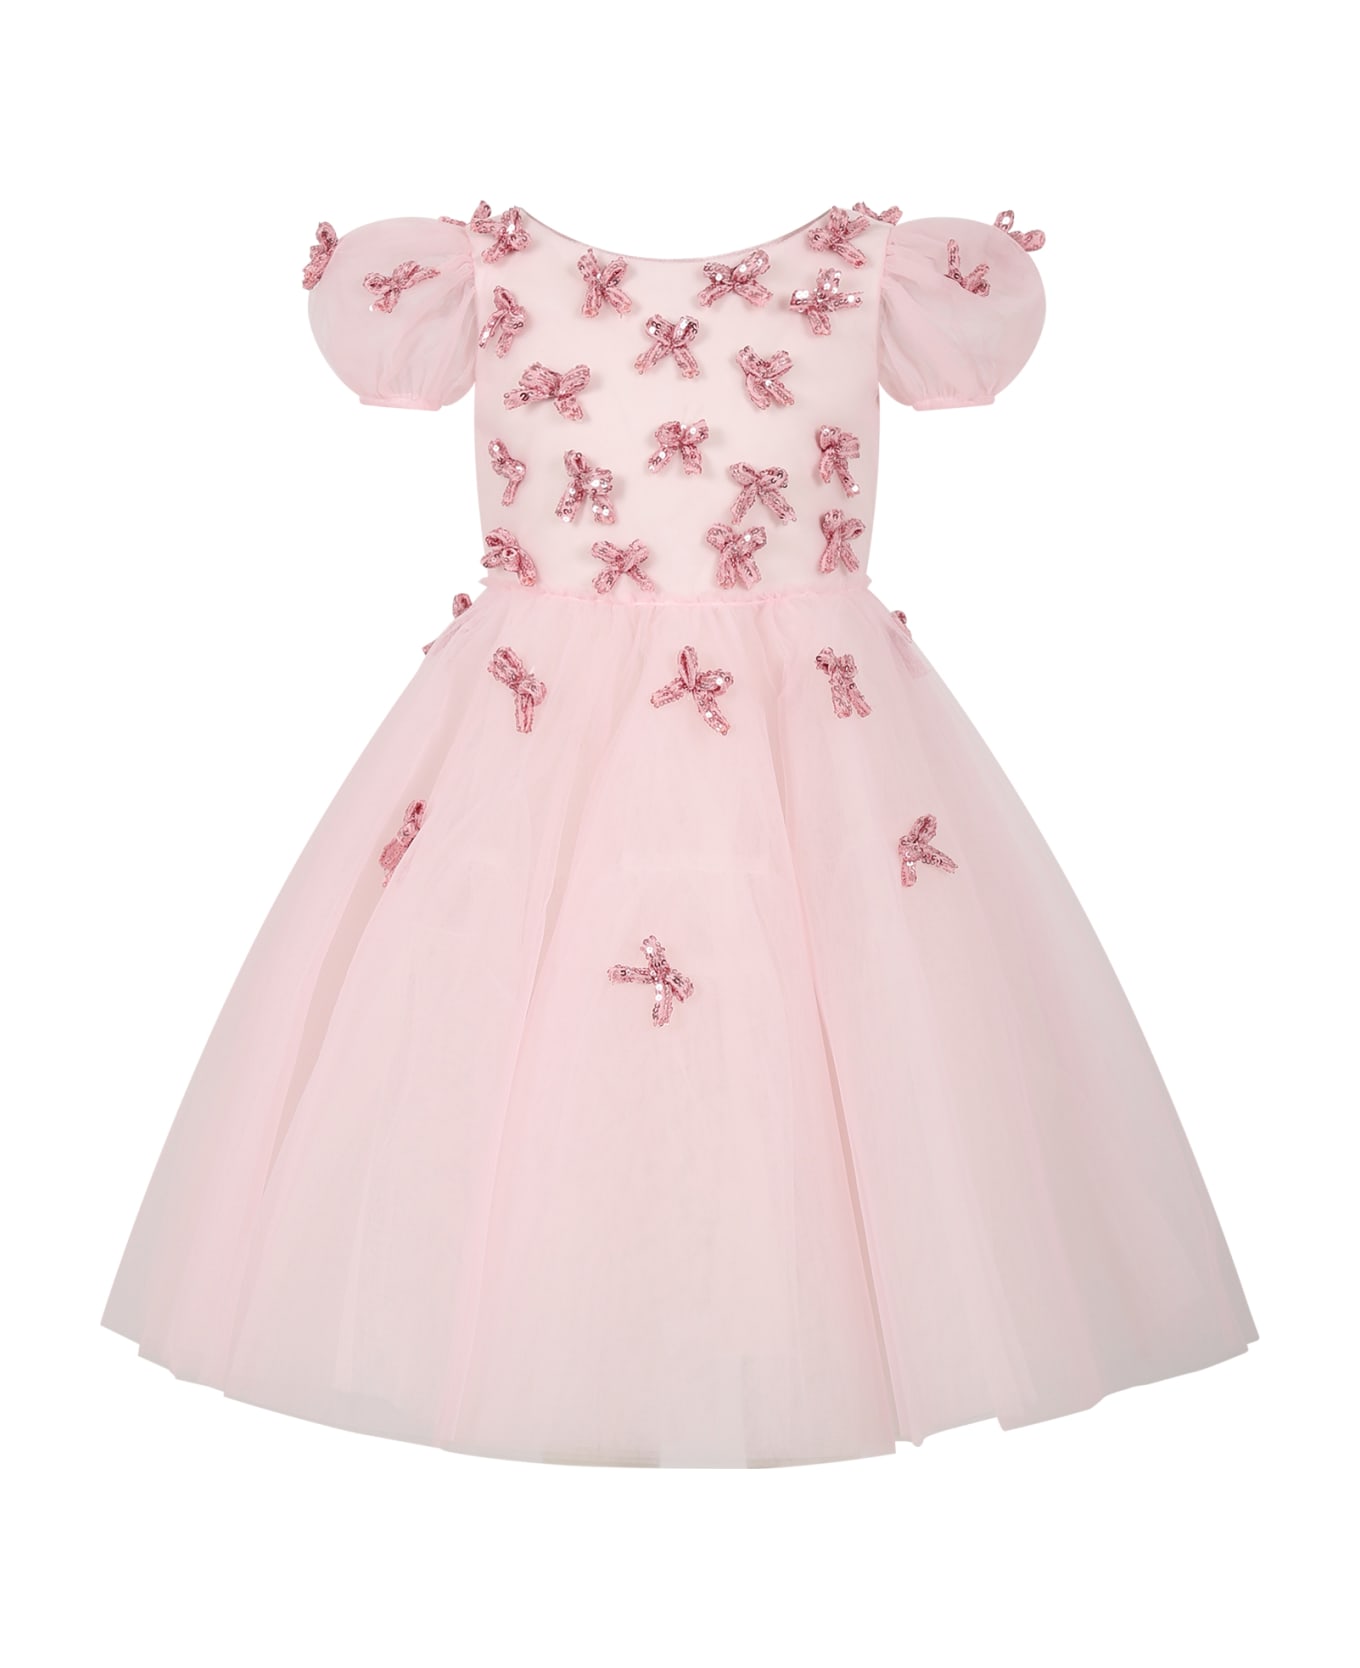 Monnalisa Pink Dress For Girl With Bows - Pink